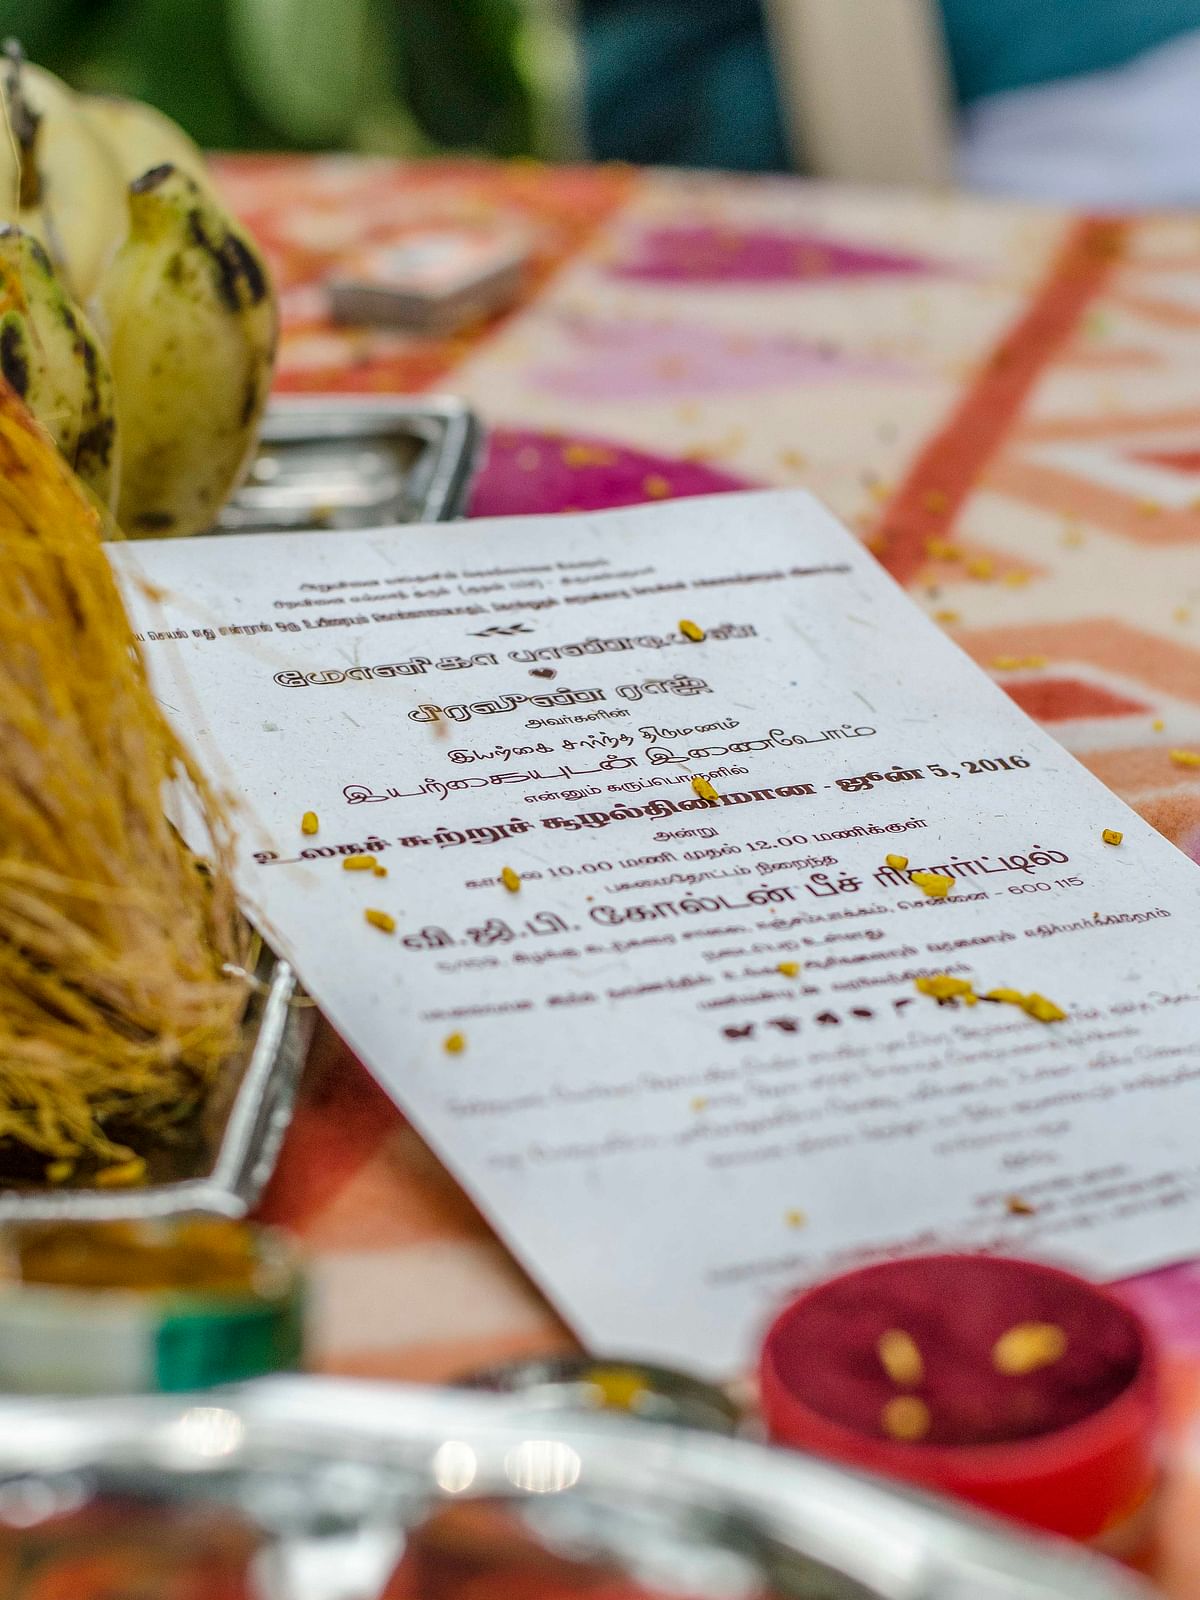 Can you host a no-silk, no-meat wedding in India? These vegan couples just did.